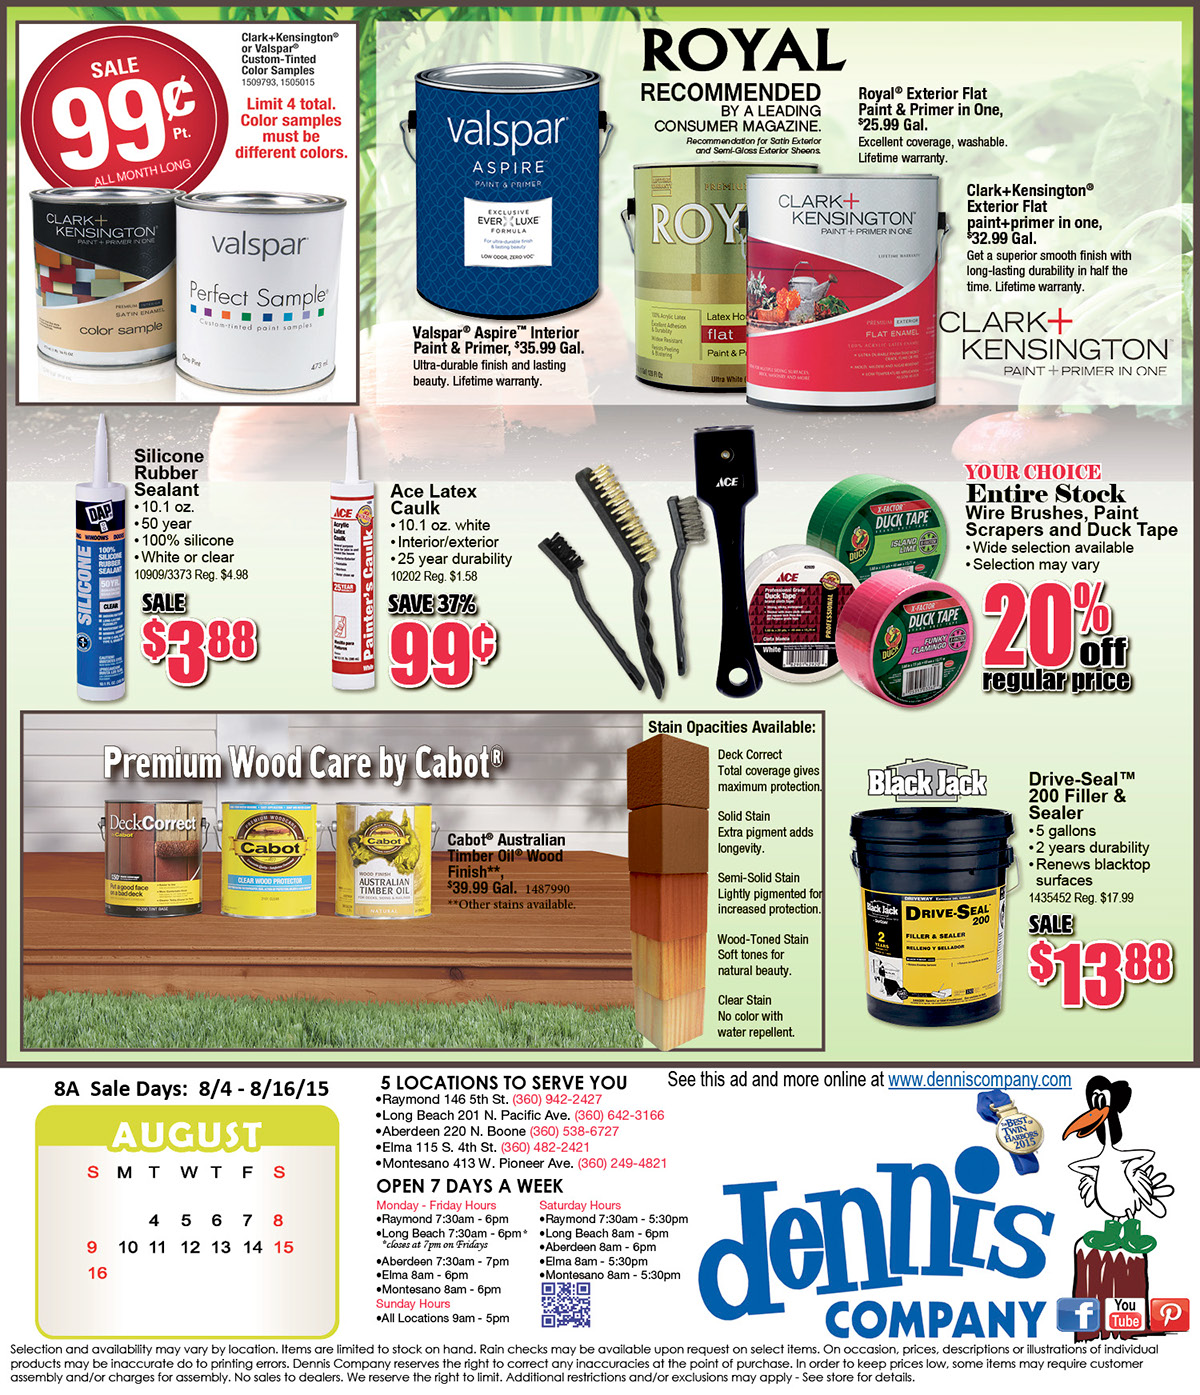 sale Retail flyer insert contest canning garden Clothing paint sporting goods